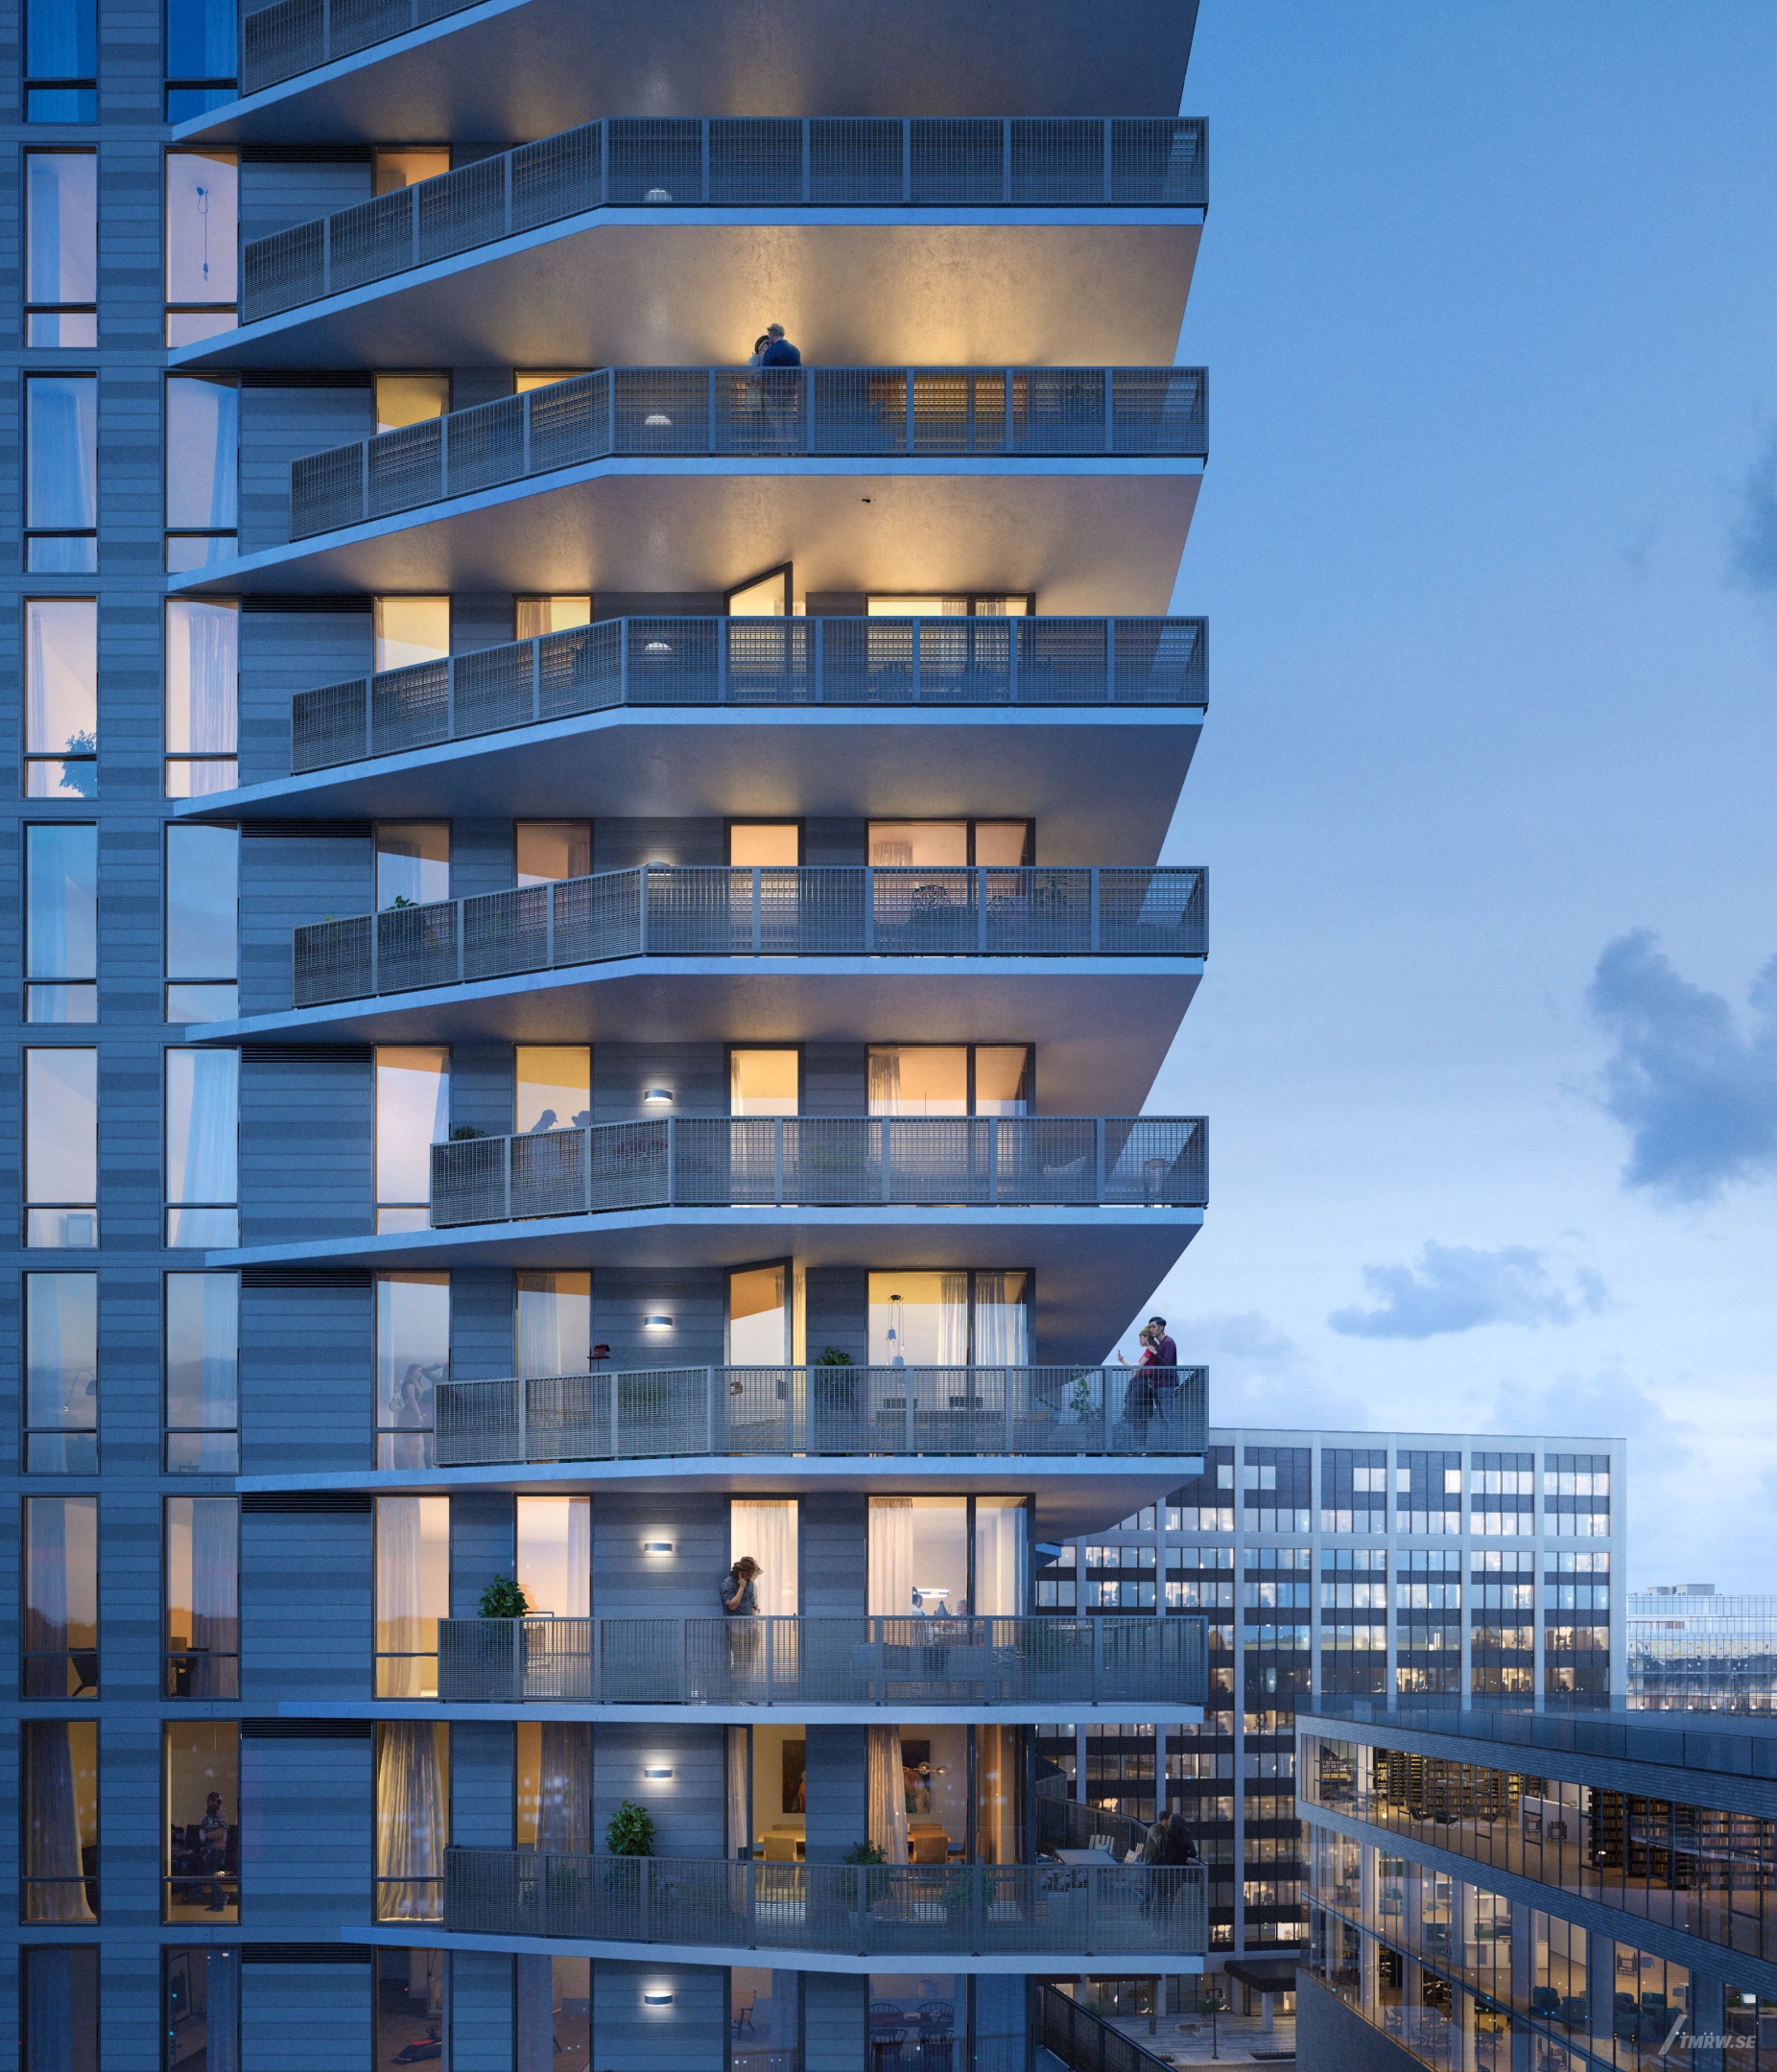 Architectural visualization of Aubrey at The Highlands for Studios, exterior of a residential tower in dusk, people on the balconies